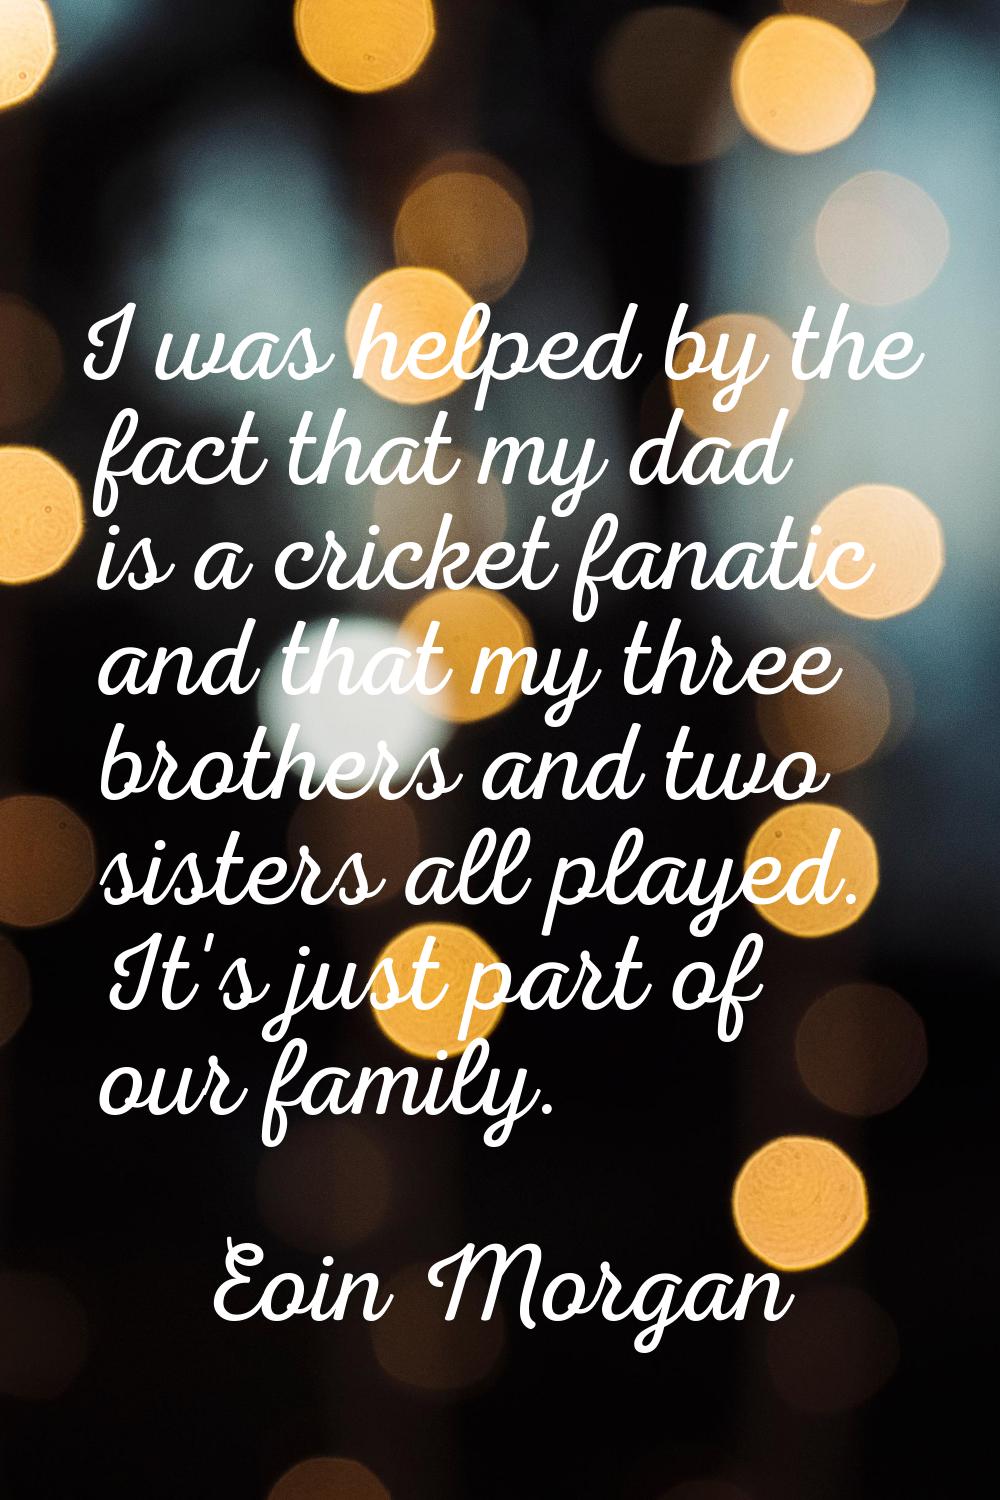 I was helped by the fact that my dad is a cricket fanatic and that my three brothers and two sister